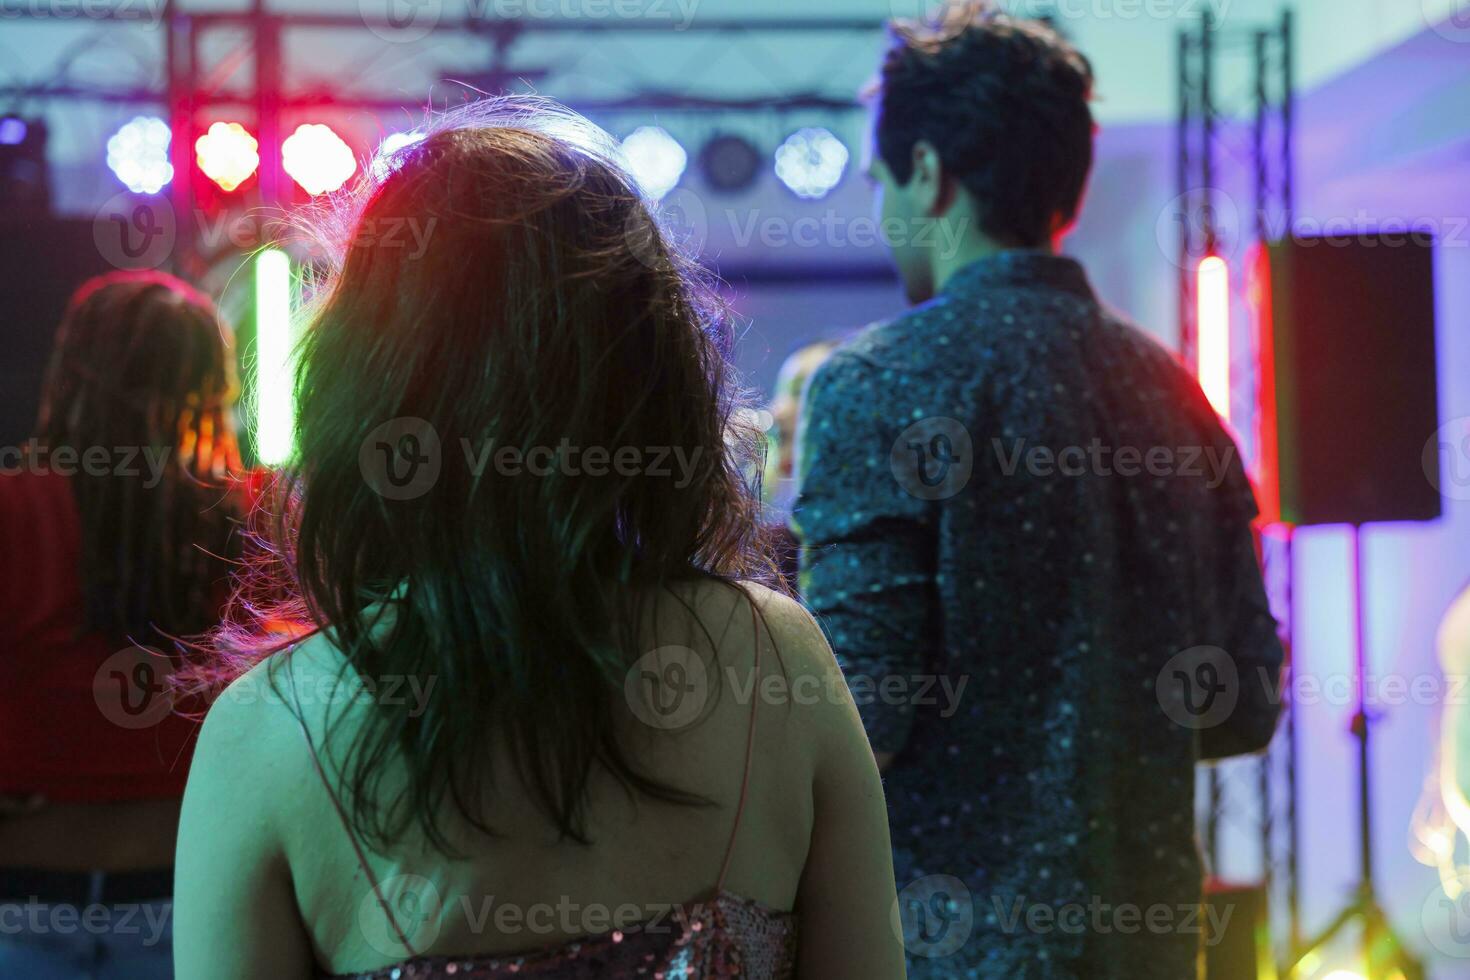 People standing on dancefloor while attending concert in nightclub with spotlights. Crowd partying, celebrating and dancing at discotheque while enjoying music in club back view photo